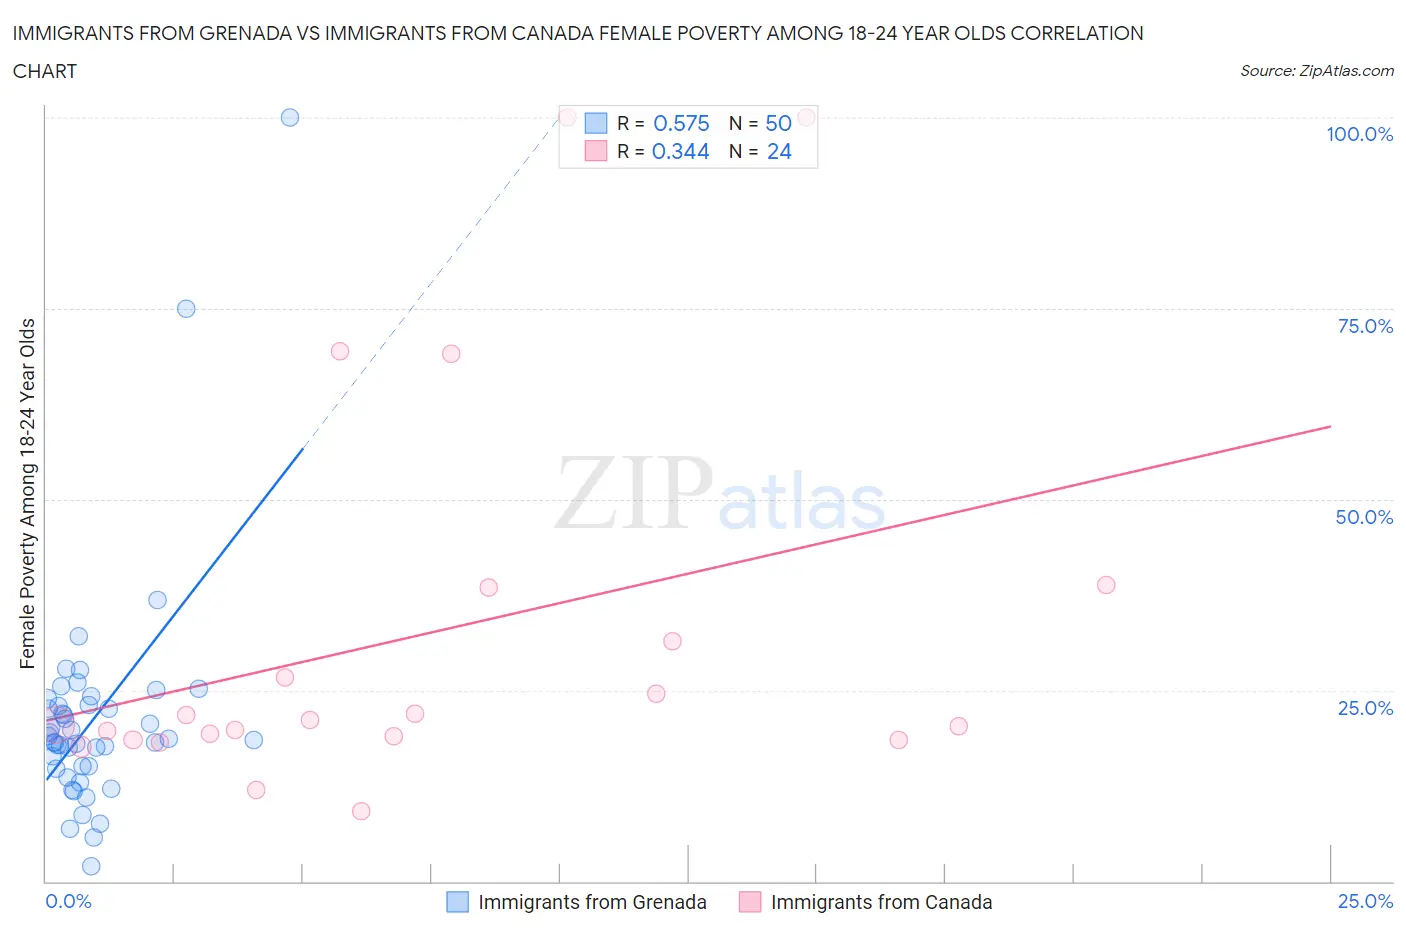 Immigrants from Grenada vs Immigrants from Canada Female Poverty Among 18-24 Year Olds